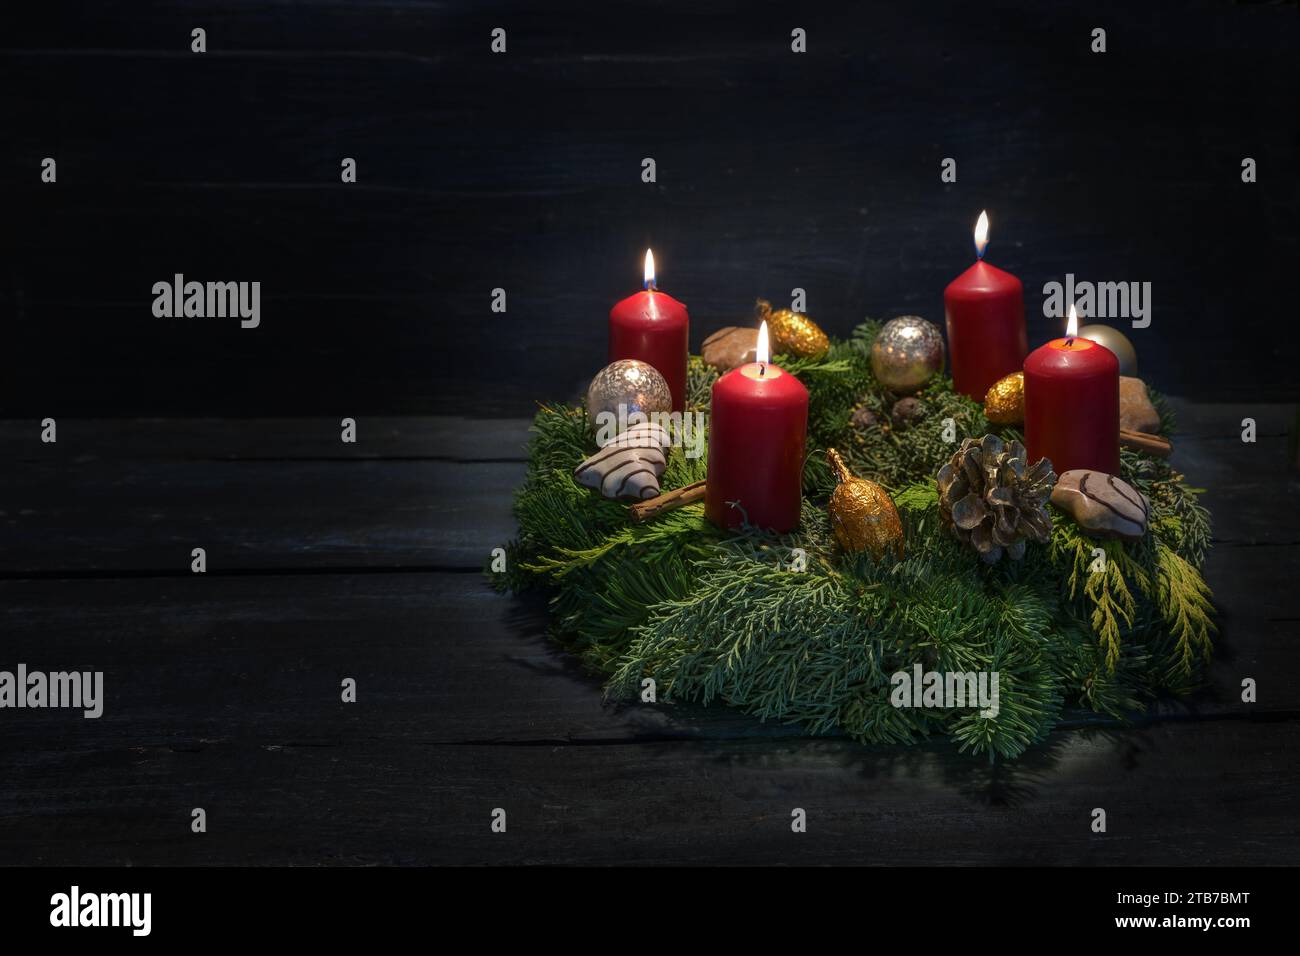 Light in the dark on fourth advent, natural green wreath with red candles, four are burning, Christmas decoration and cookies, dark wooden background, Stock Photo